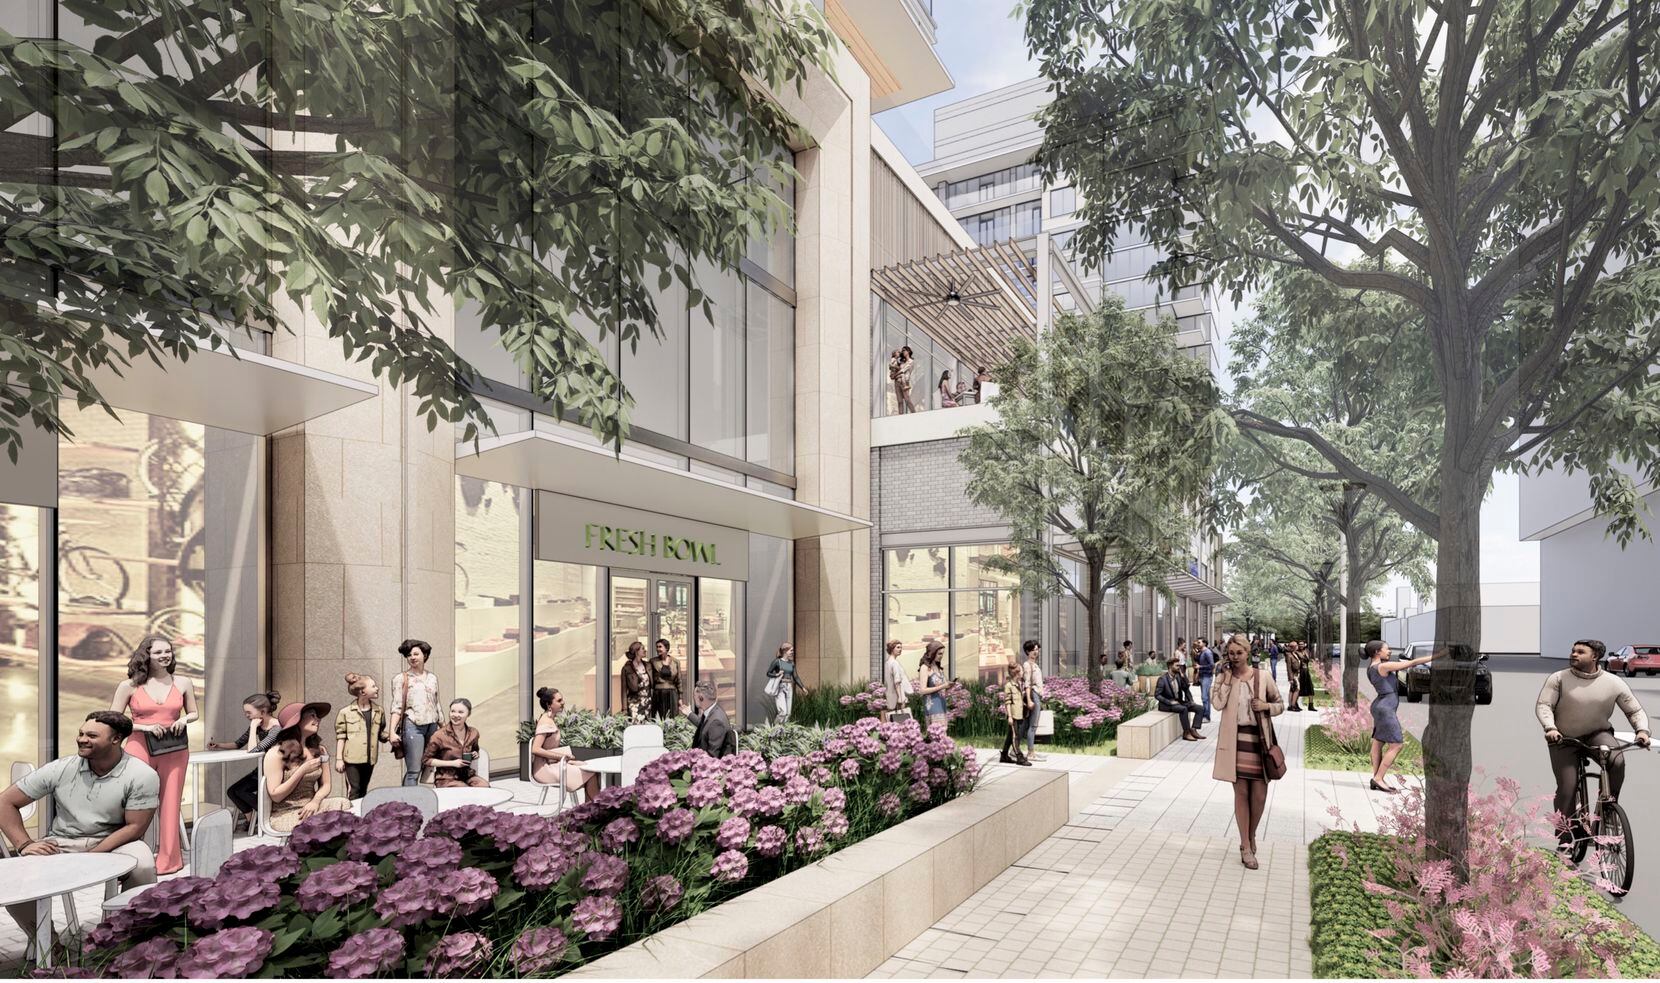 Along Luther Lane, the project includes wide sidewalks and outdoor dining.